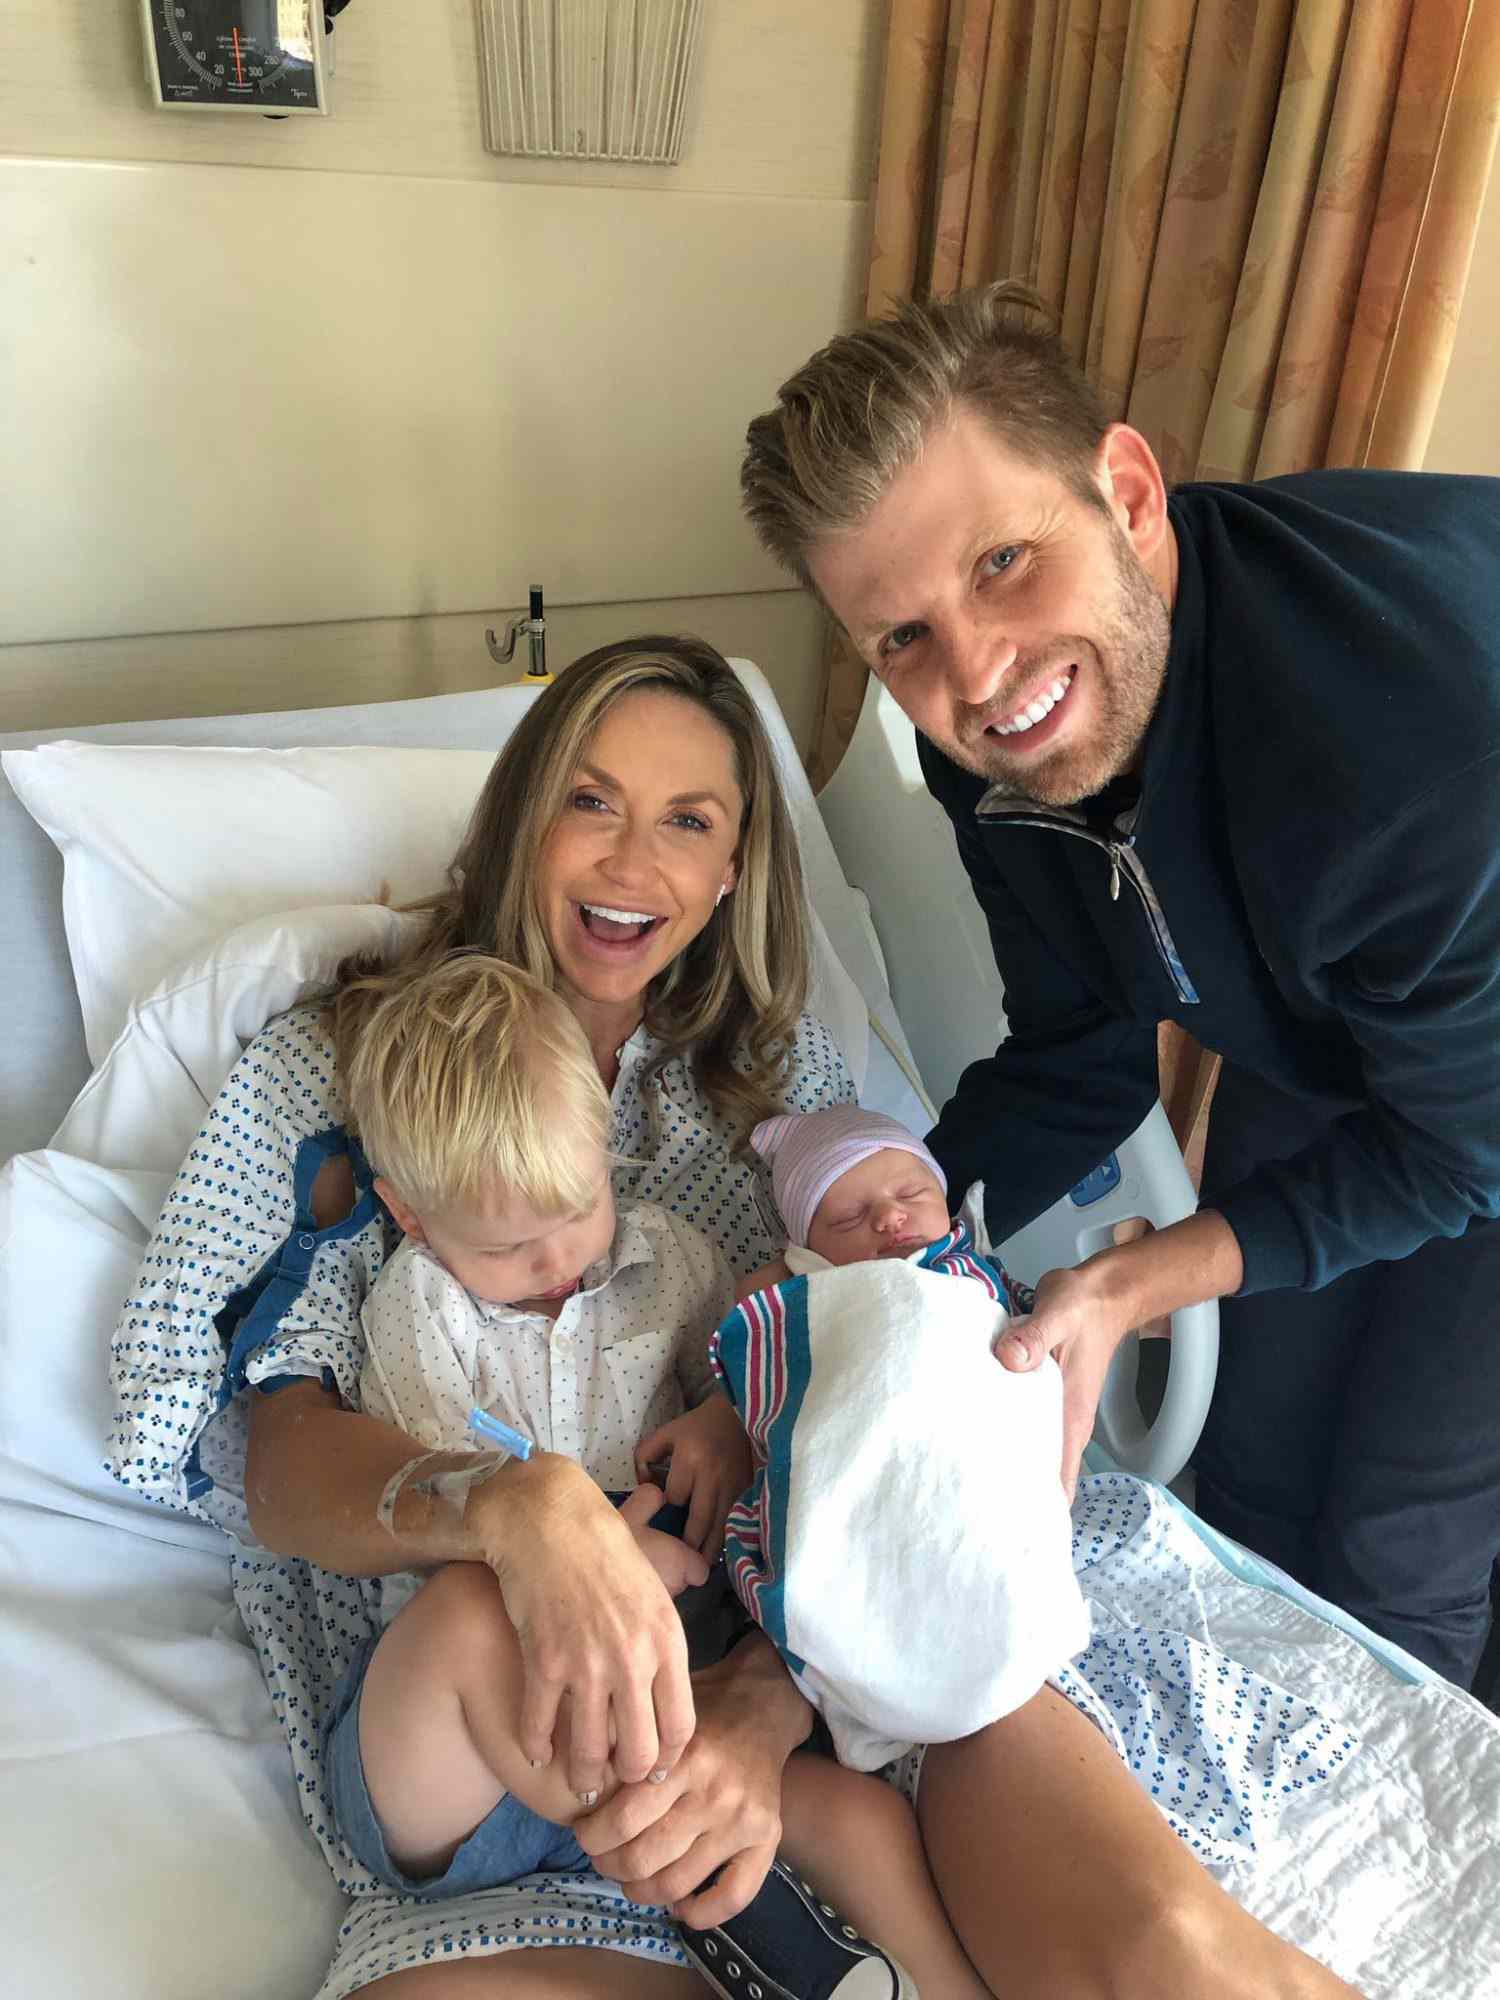 <p>Eric Trump and wife Lara have welcomed their second child.</p>
                            <p>"@LaraLeaTrump and I are excited to welcome Carolina Dorothy Trump into the world," Eric tweeted on Aug. 19, 2019. "We love you already!"</p>
                            <p>Carolina joins big brother Eric Luke and is President Donald Trump's 10th grandchild. (Eric's brother Donald Trump Jr. has five kids with his ex-wife Vanessa, while sister Ivanka Trump has three with husband Jared Kushner.)</p>
                            